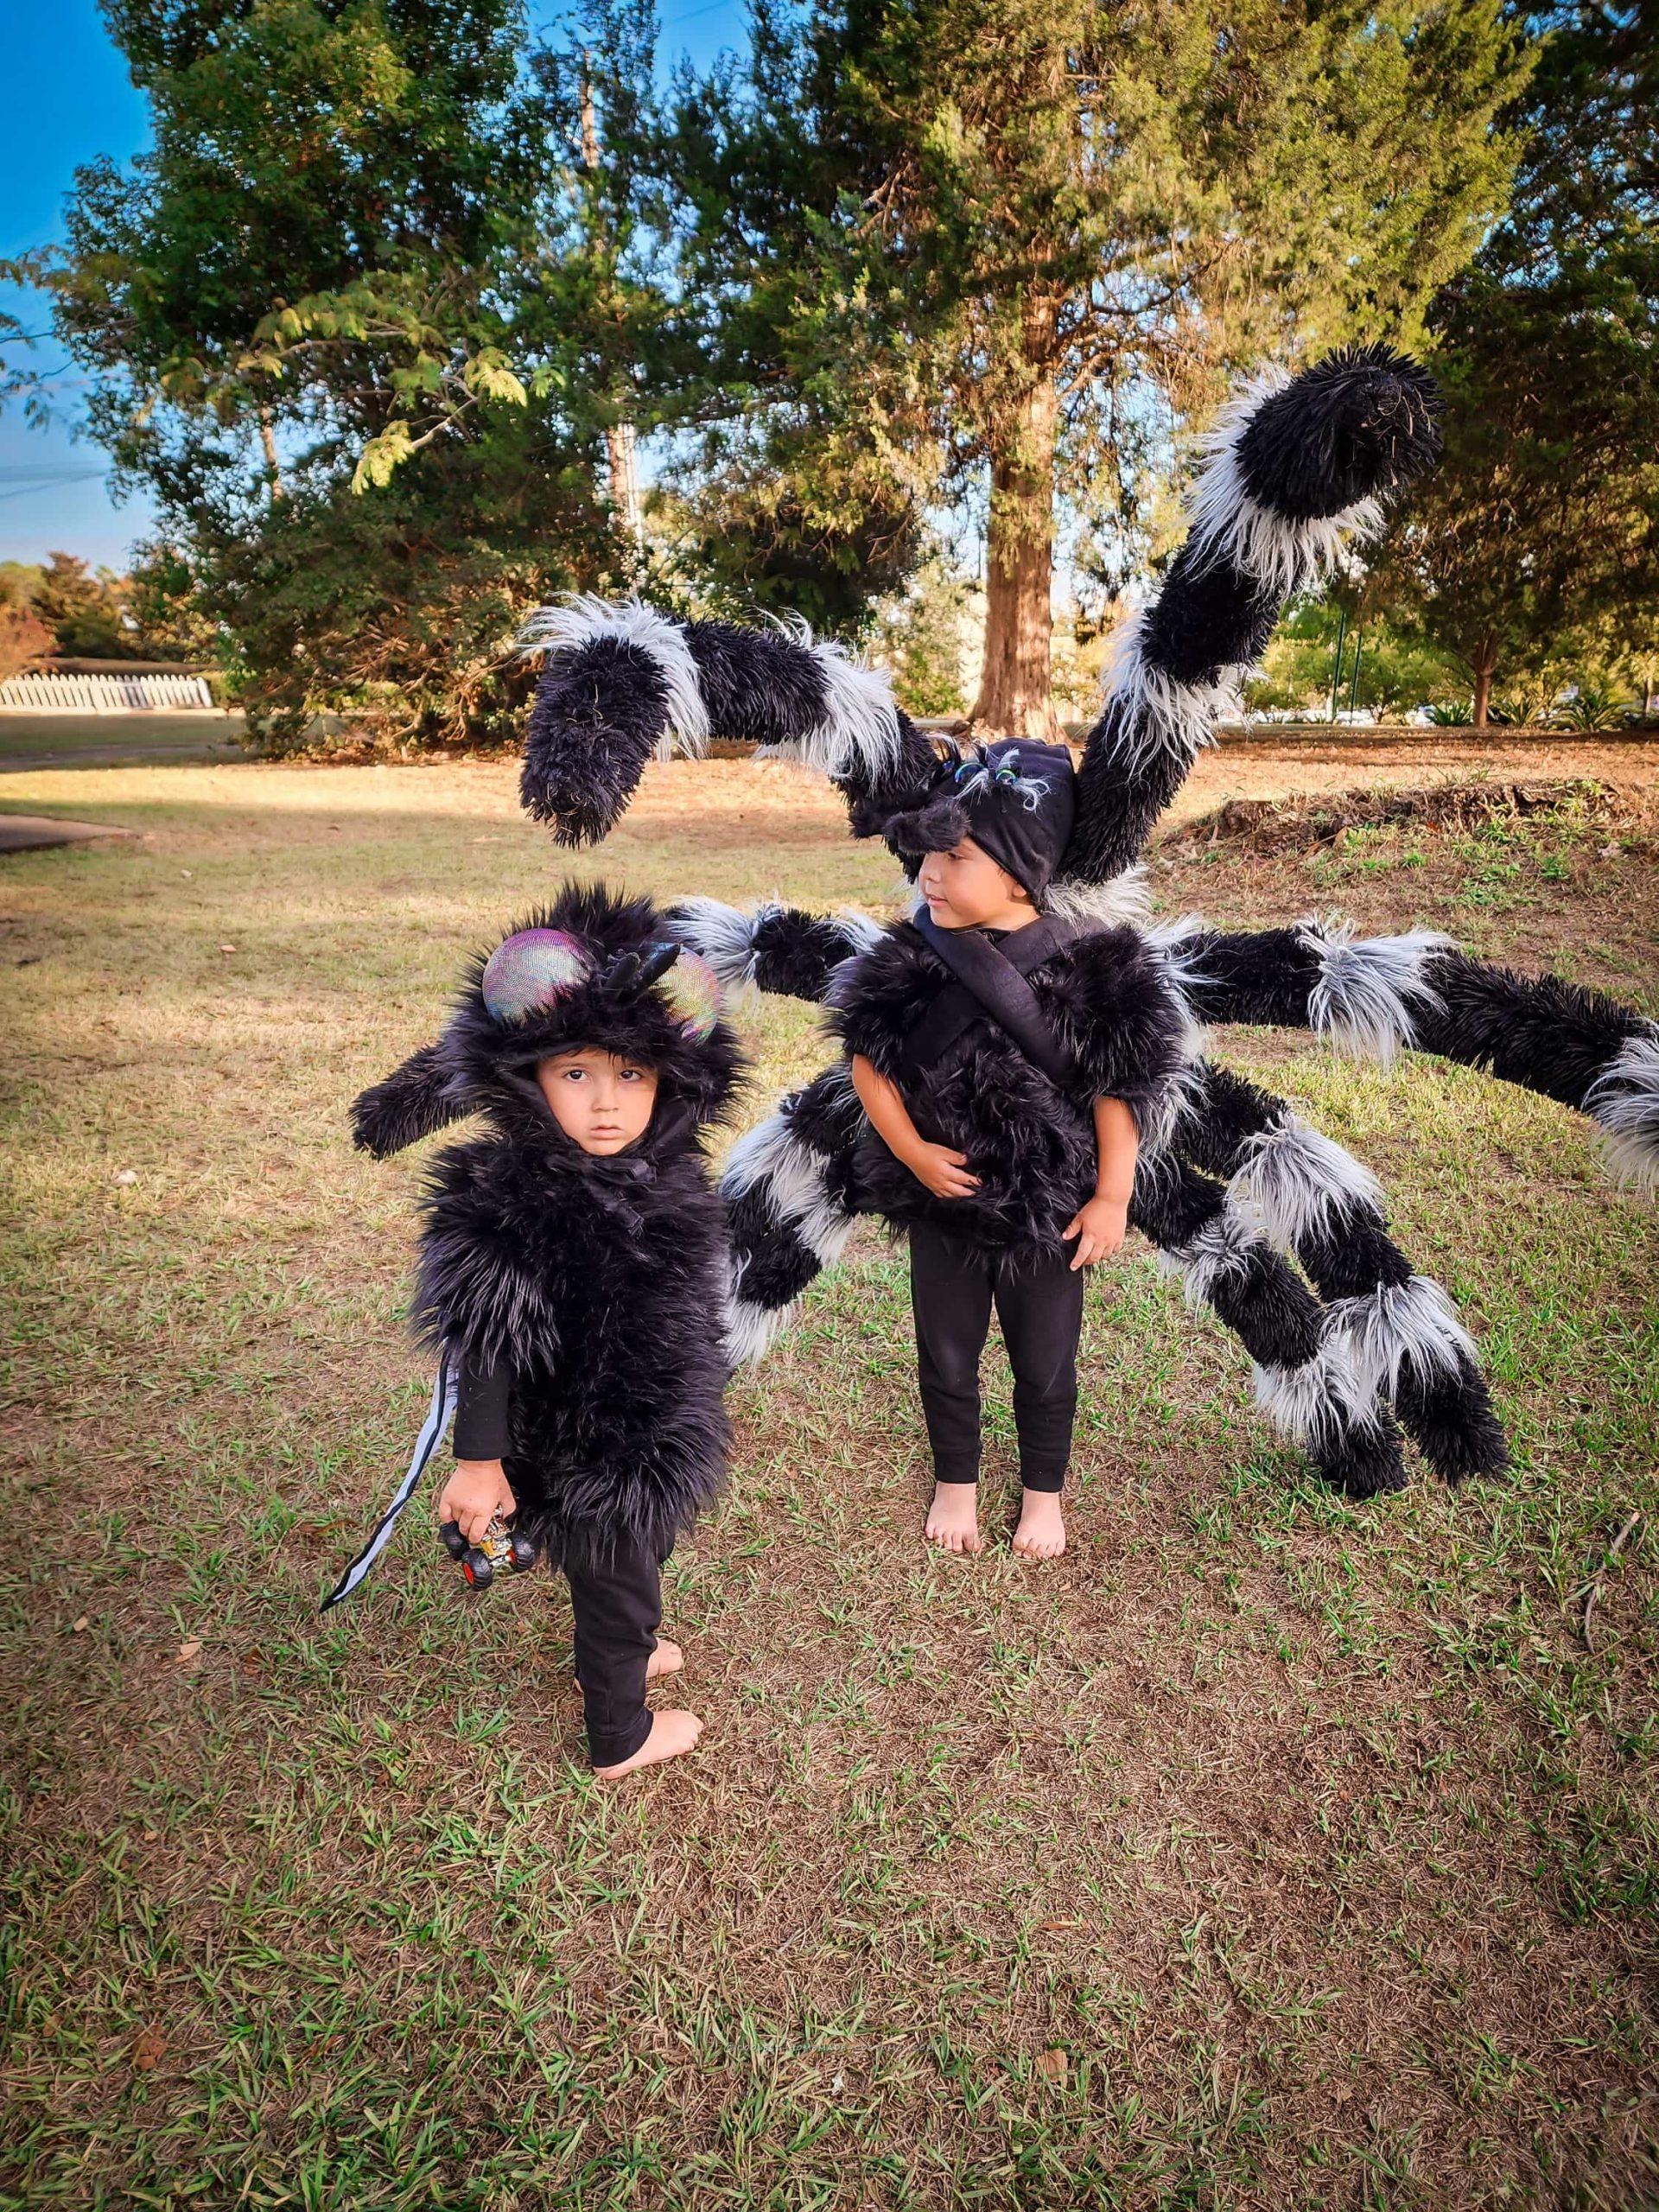 Coolest Homemade Fly Costumes